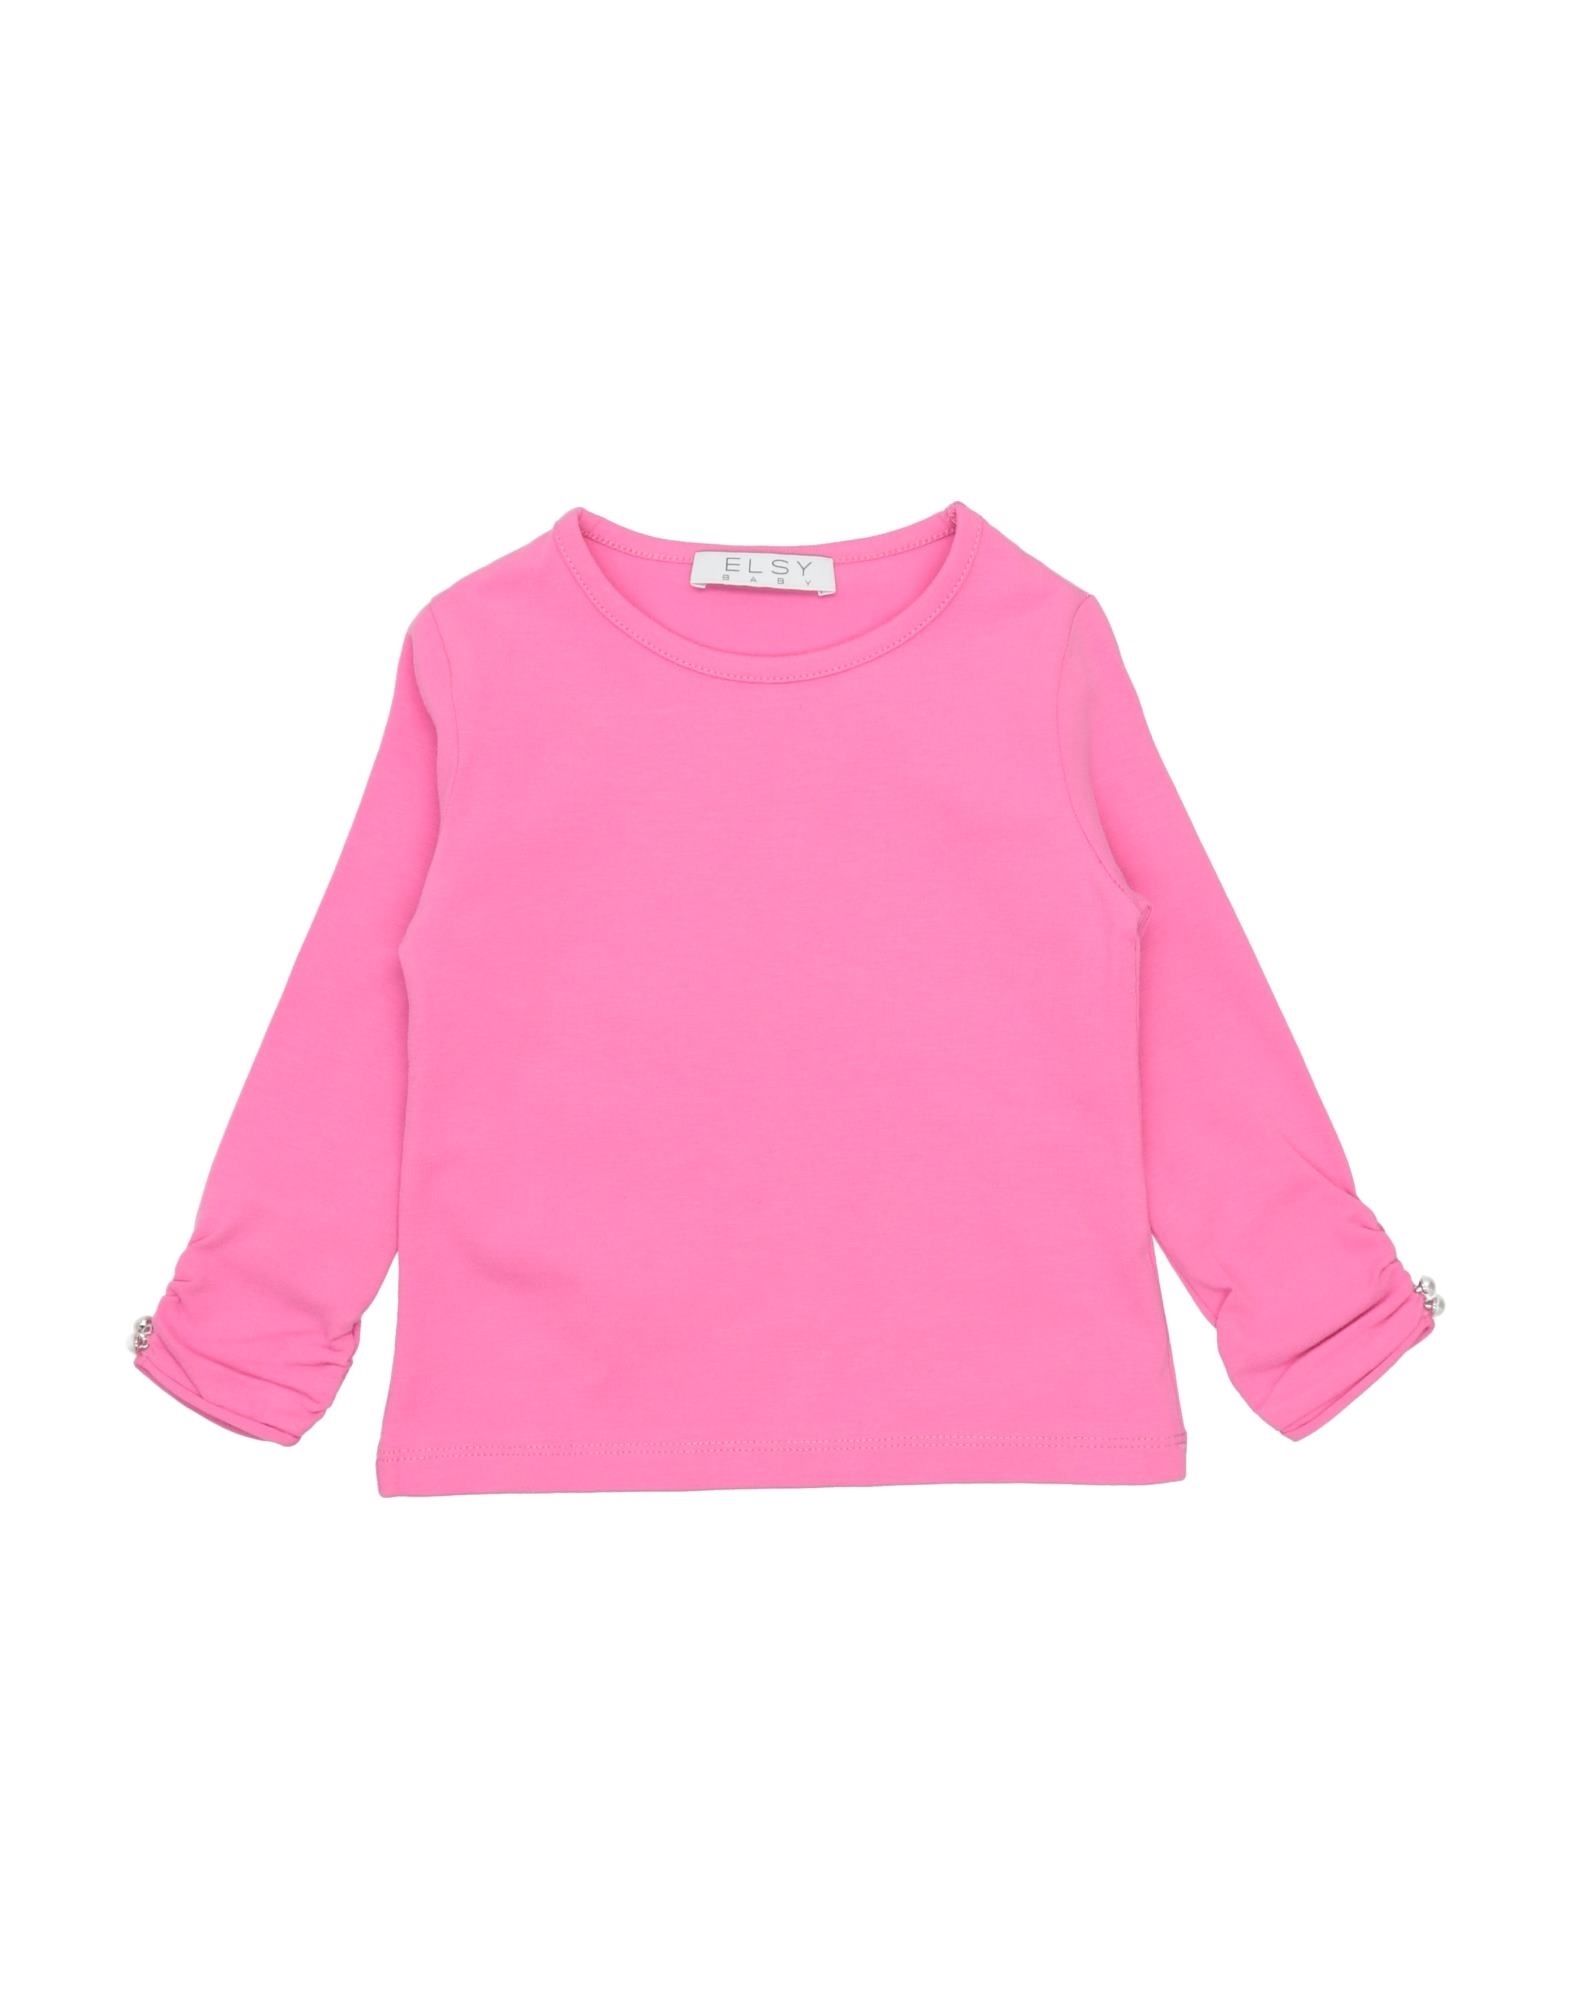 Elsy Kids' T-shirts In Pink